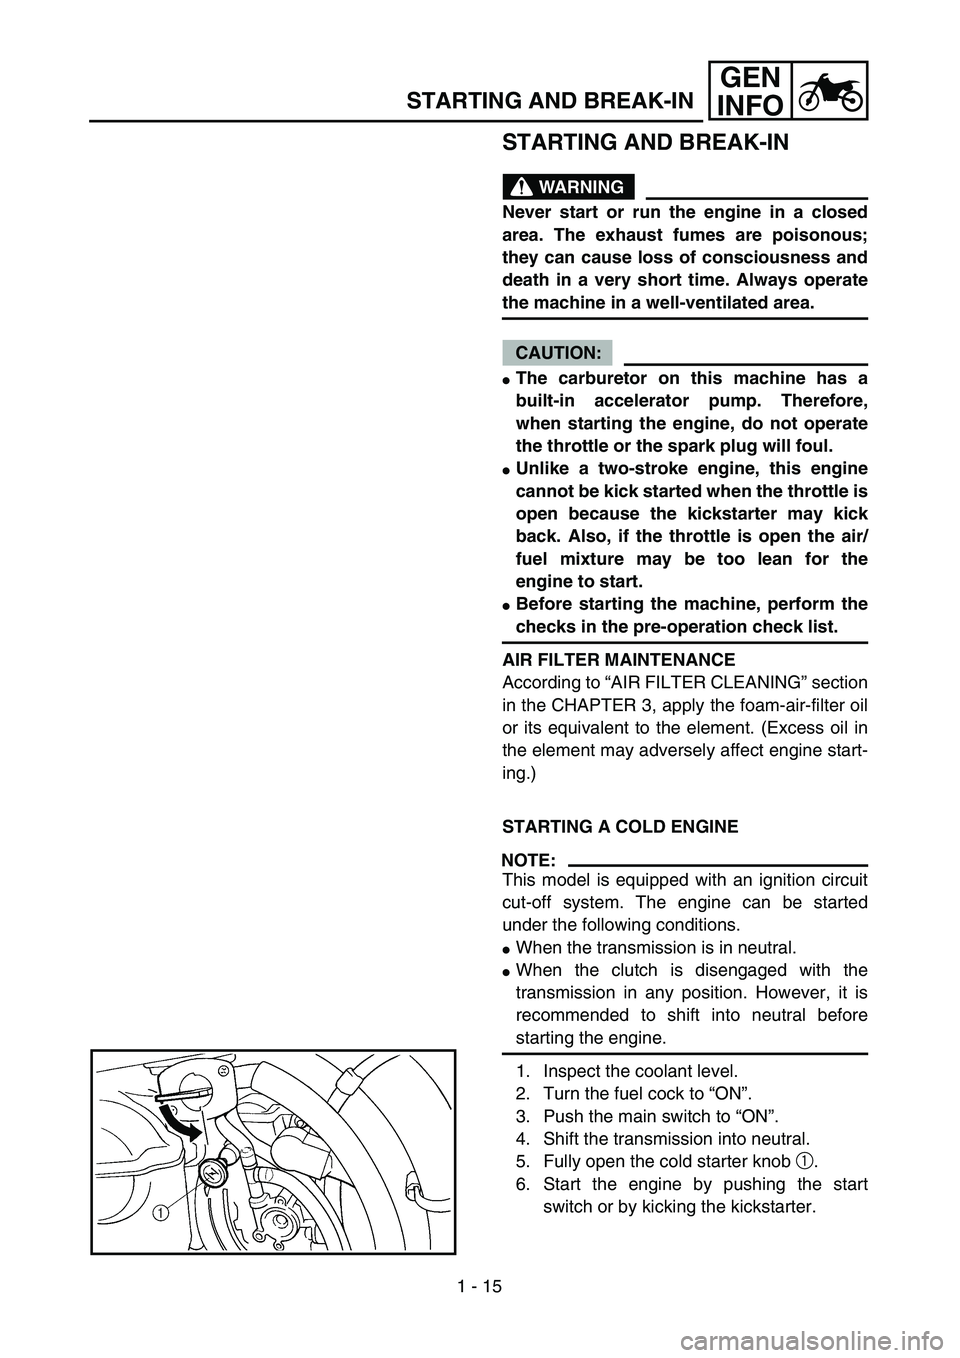 YAMAHA WR 450F 2004  Owners Manual 1 - 15
GEN
INFO
STARTING AND BREAK-IN
STARTING AND BREAK-IN
WARNING
Never start or run the engine in a closed
area. The exhaust fumes are poisonous;
they can cause loss of consciousness and
death in a